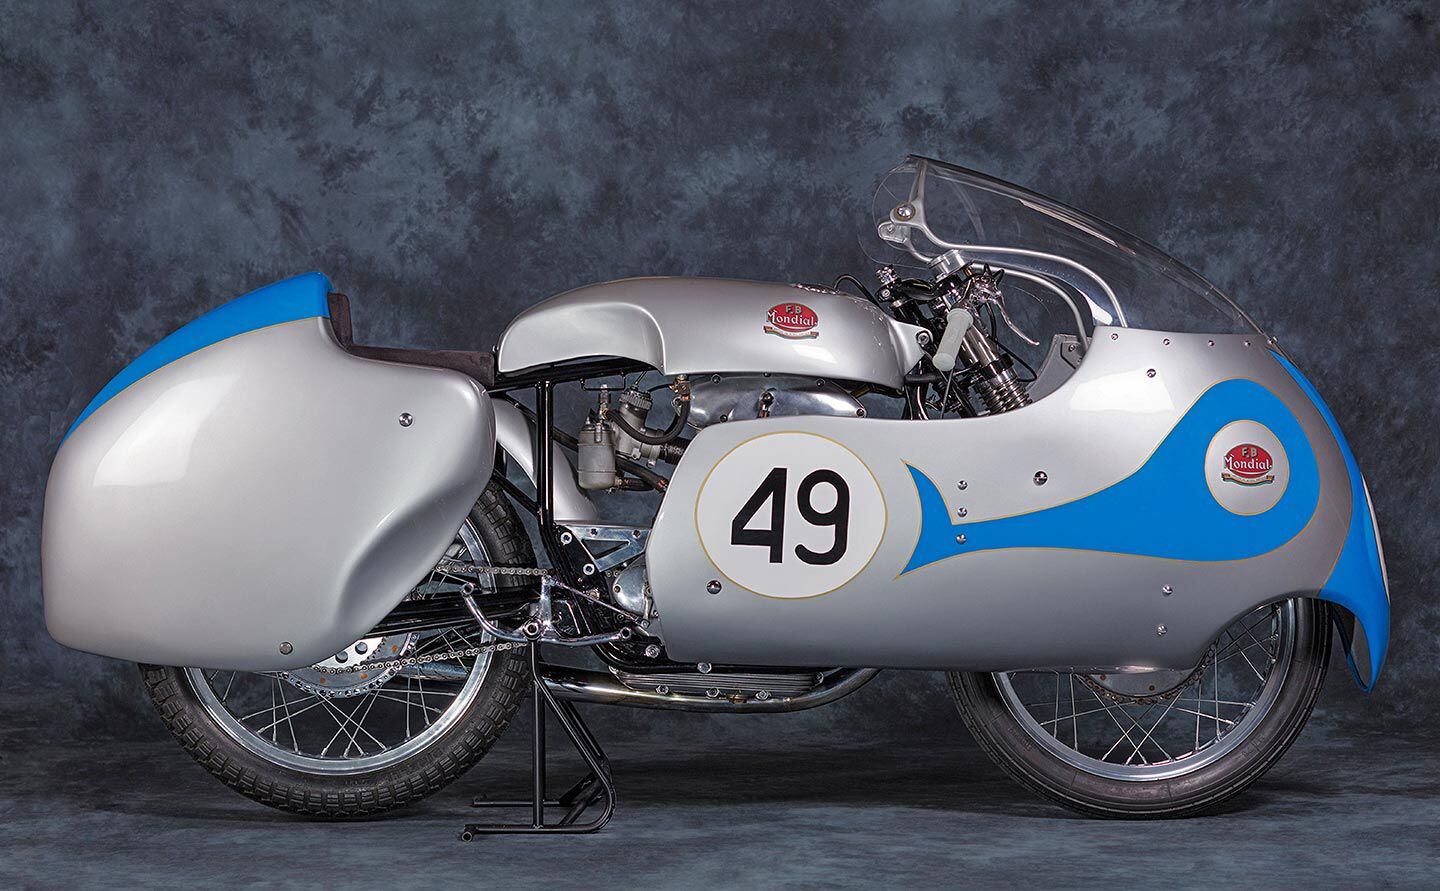 With a beautiful dustbin fairing hand-fabricated by an Italian legend and an engine with a GP pedigree, this 1957 Mondial 250 Bialbero Grand Prix Racer is truly one of a kind.